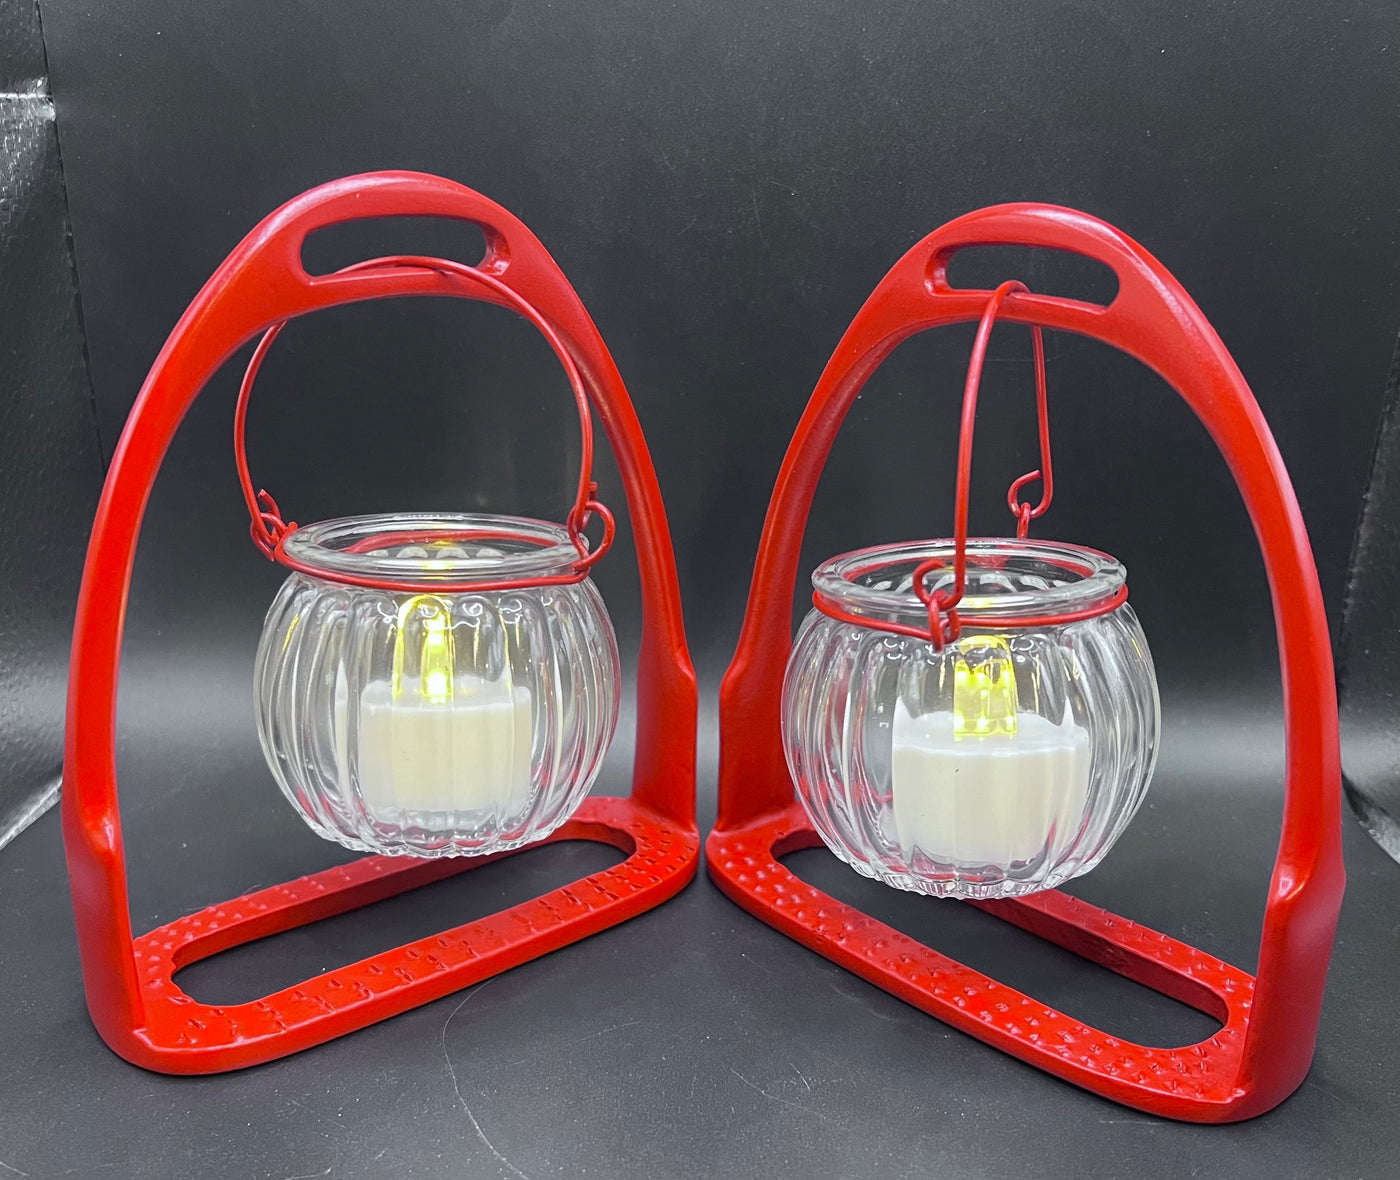 English Stirrup Candle Lights - Red